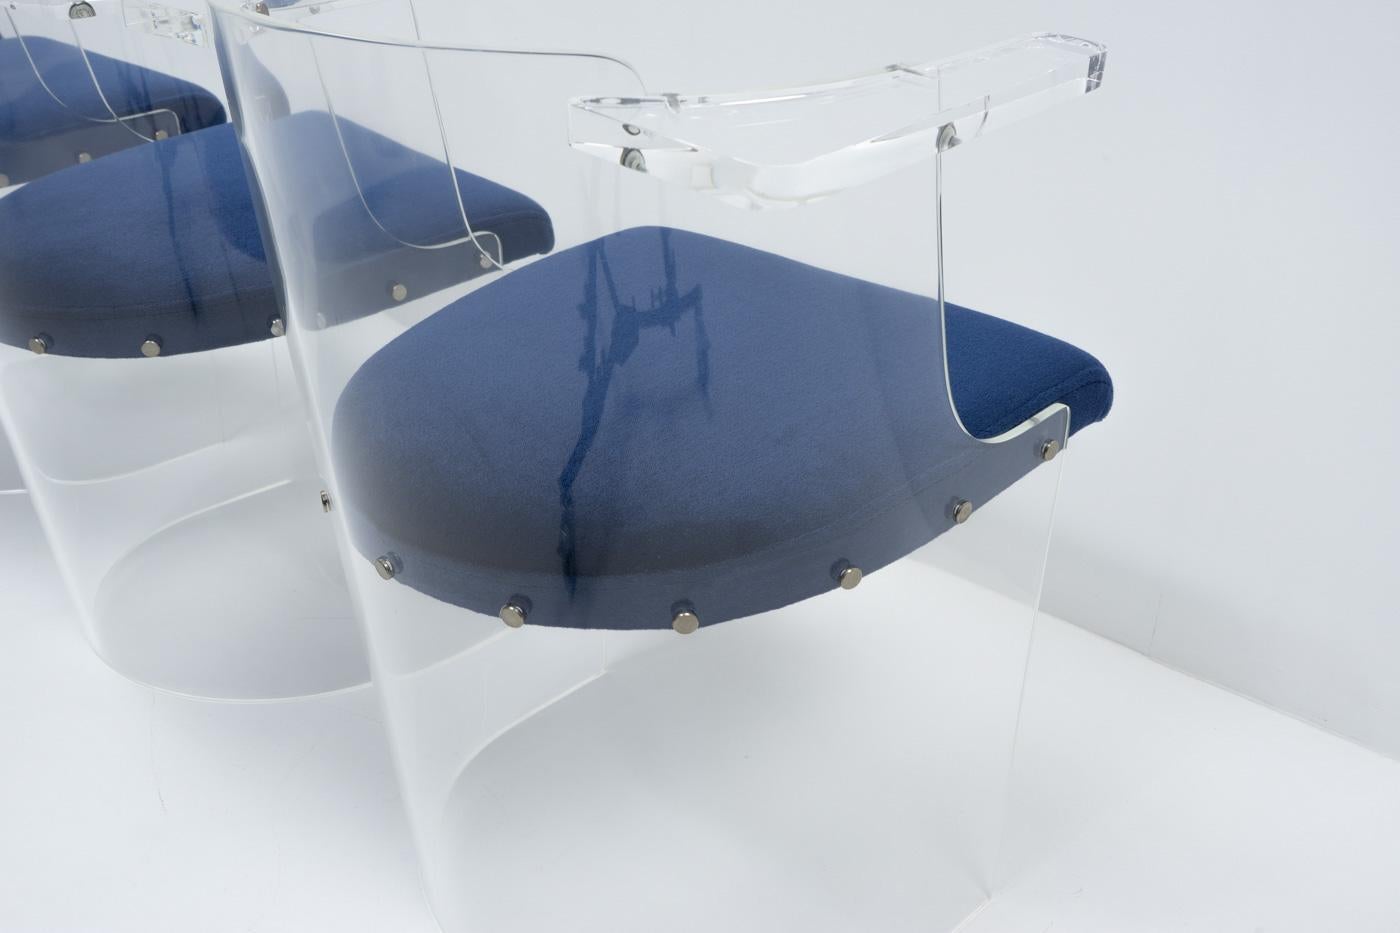 Mohair D61 Chairs by El Lissitzky for Tecta Germany - 1980s For Sale